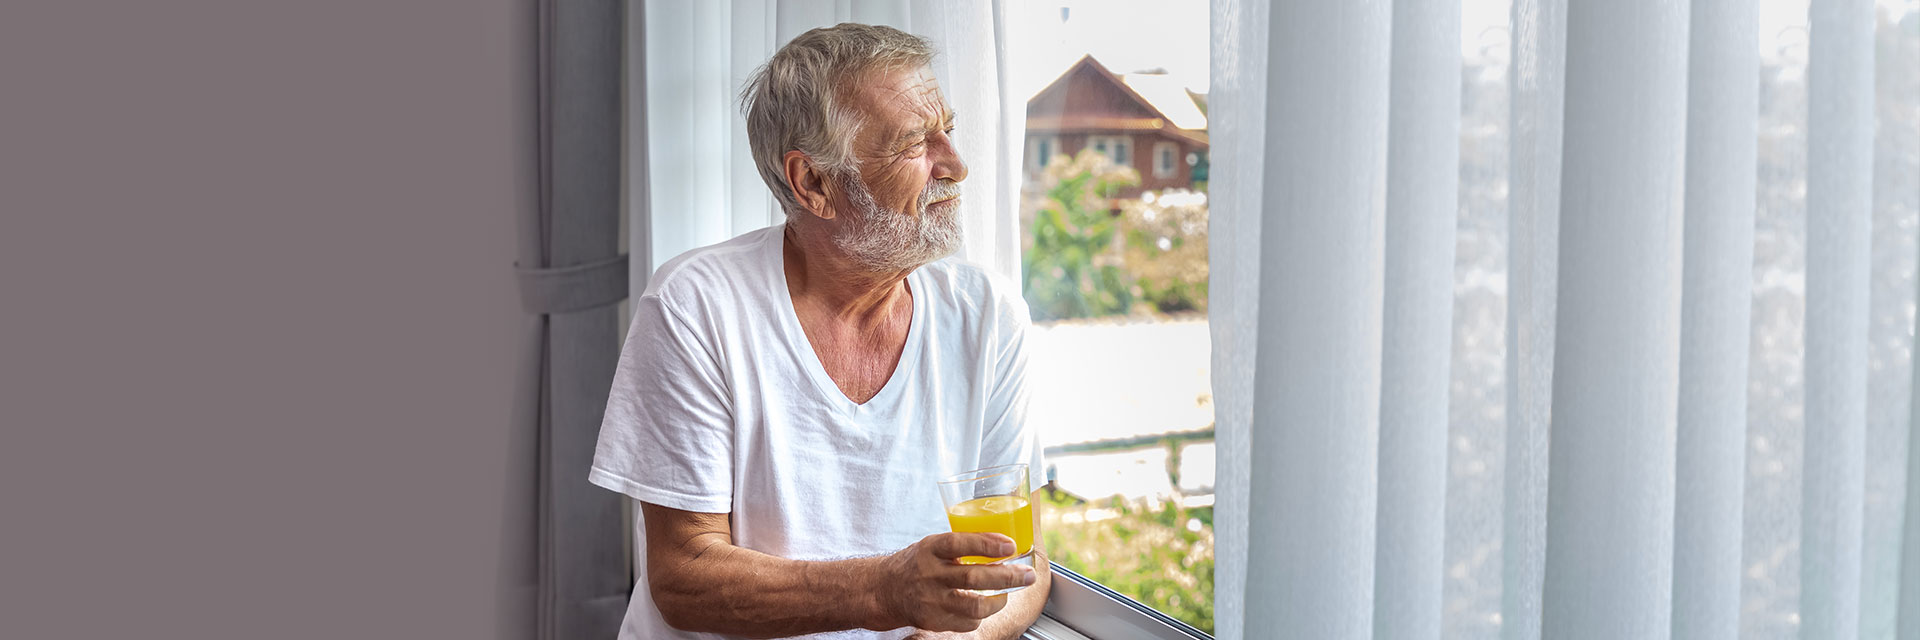 Man drinking juice looking out of window 